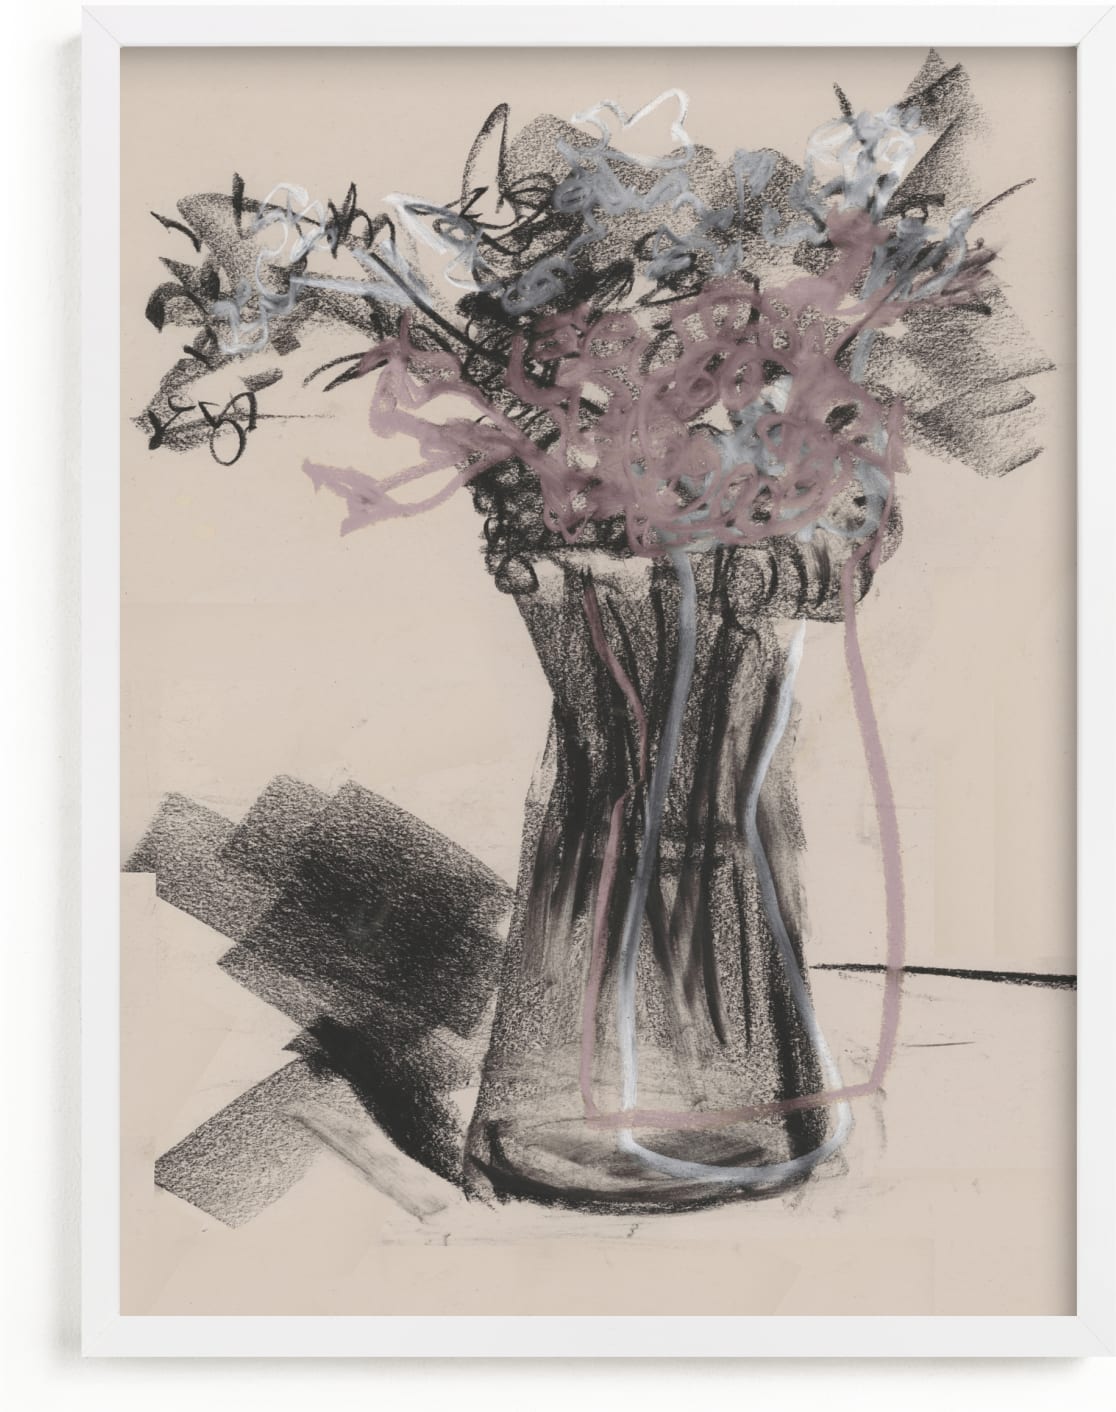 This is a purple art by Bethania Lima called Vase of flower gestural drawing exercise.